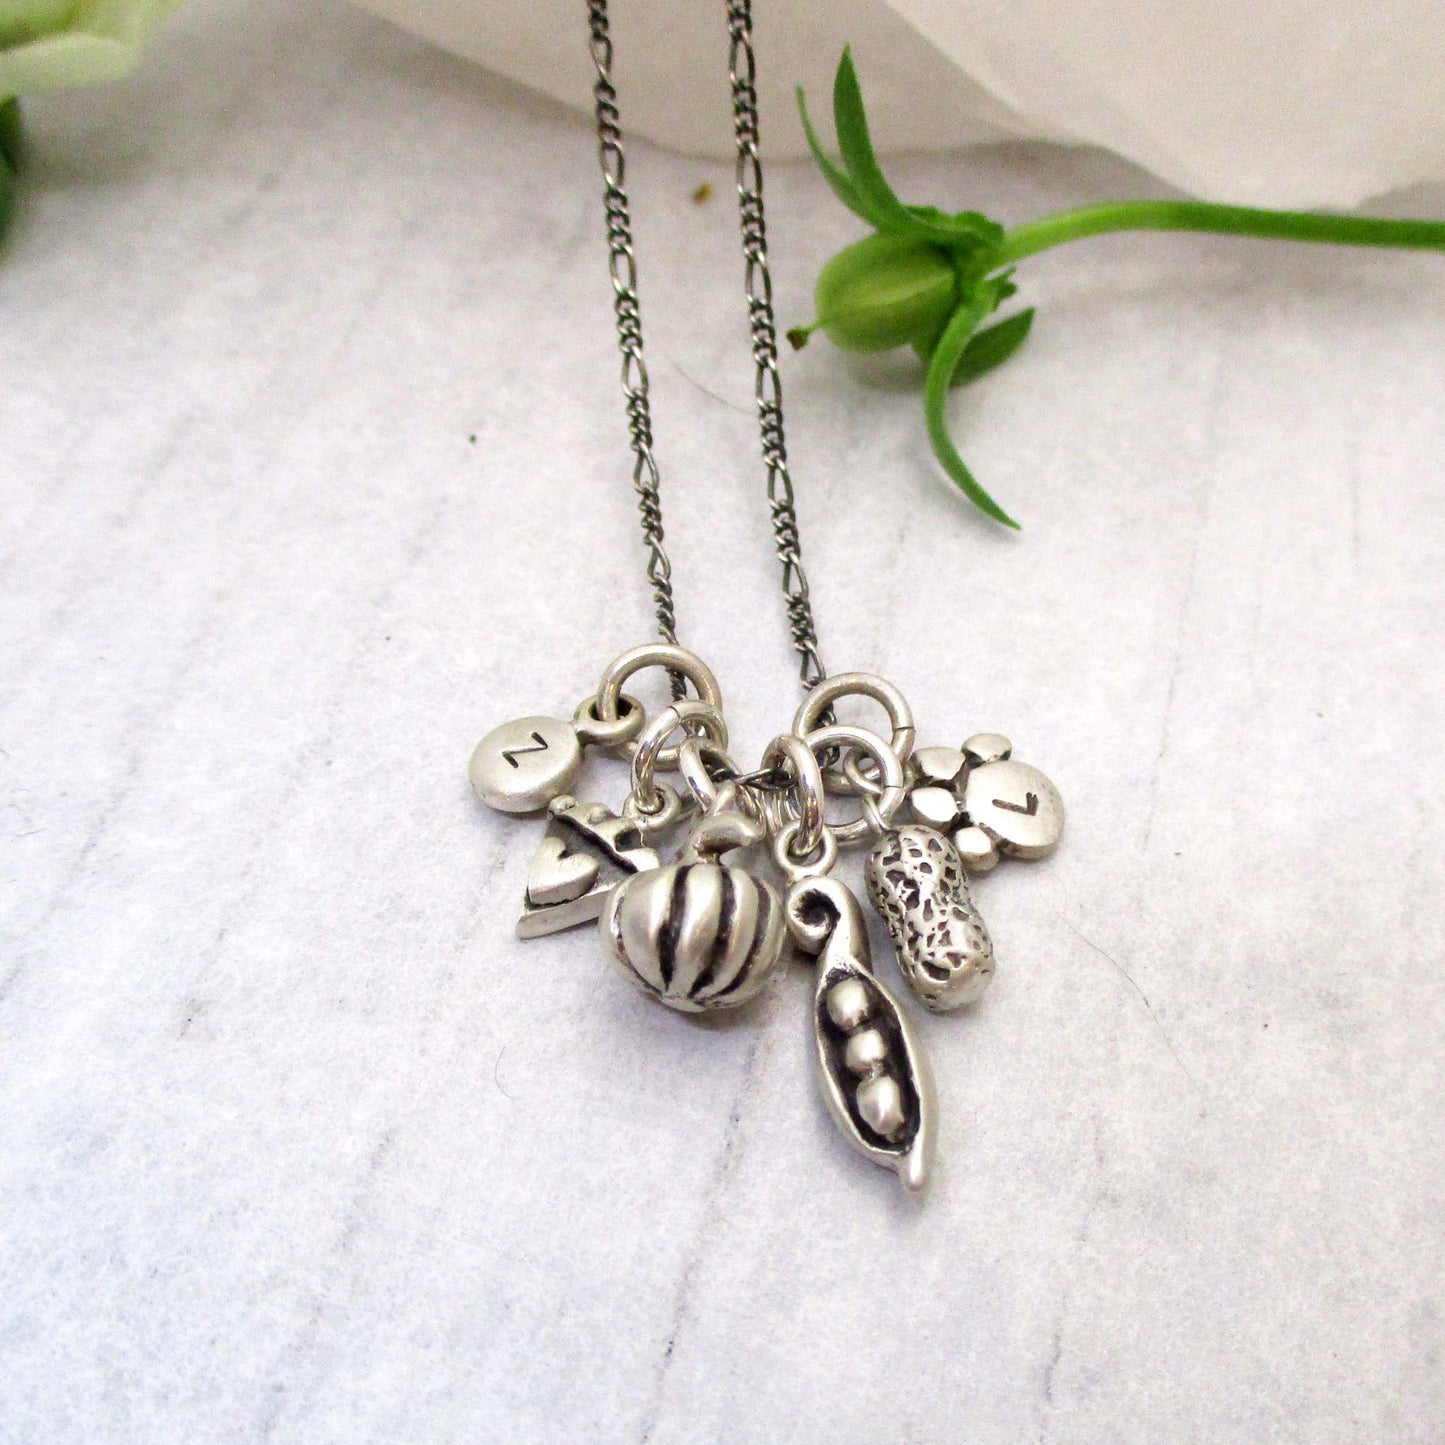 Load image into Gallery viewer, Sweet Pea, Peas in a Pod Charm in Sterling Silver
